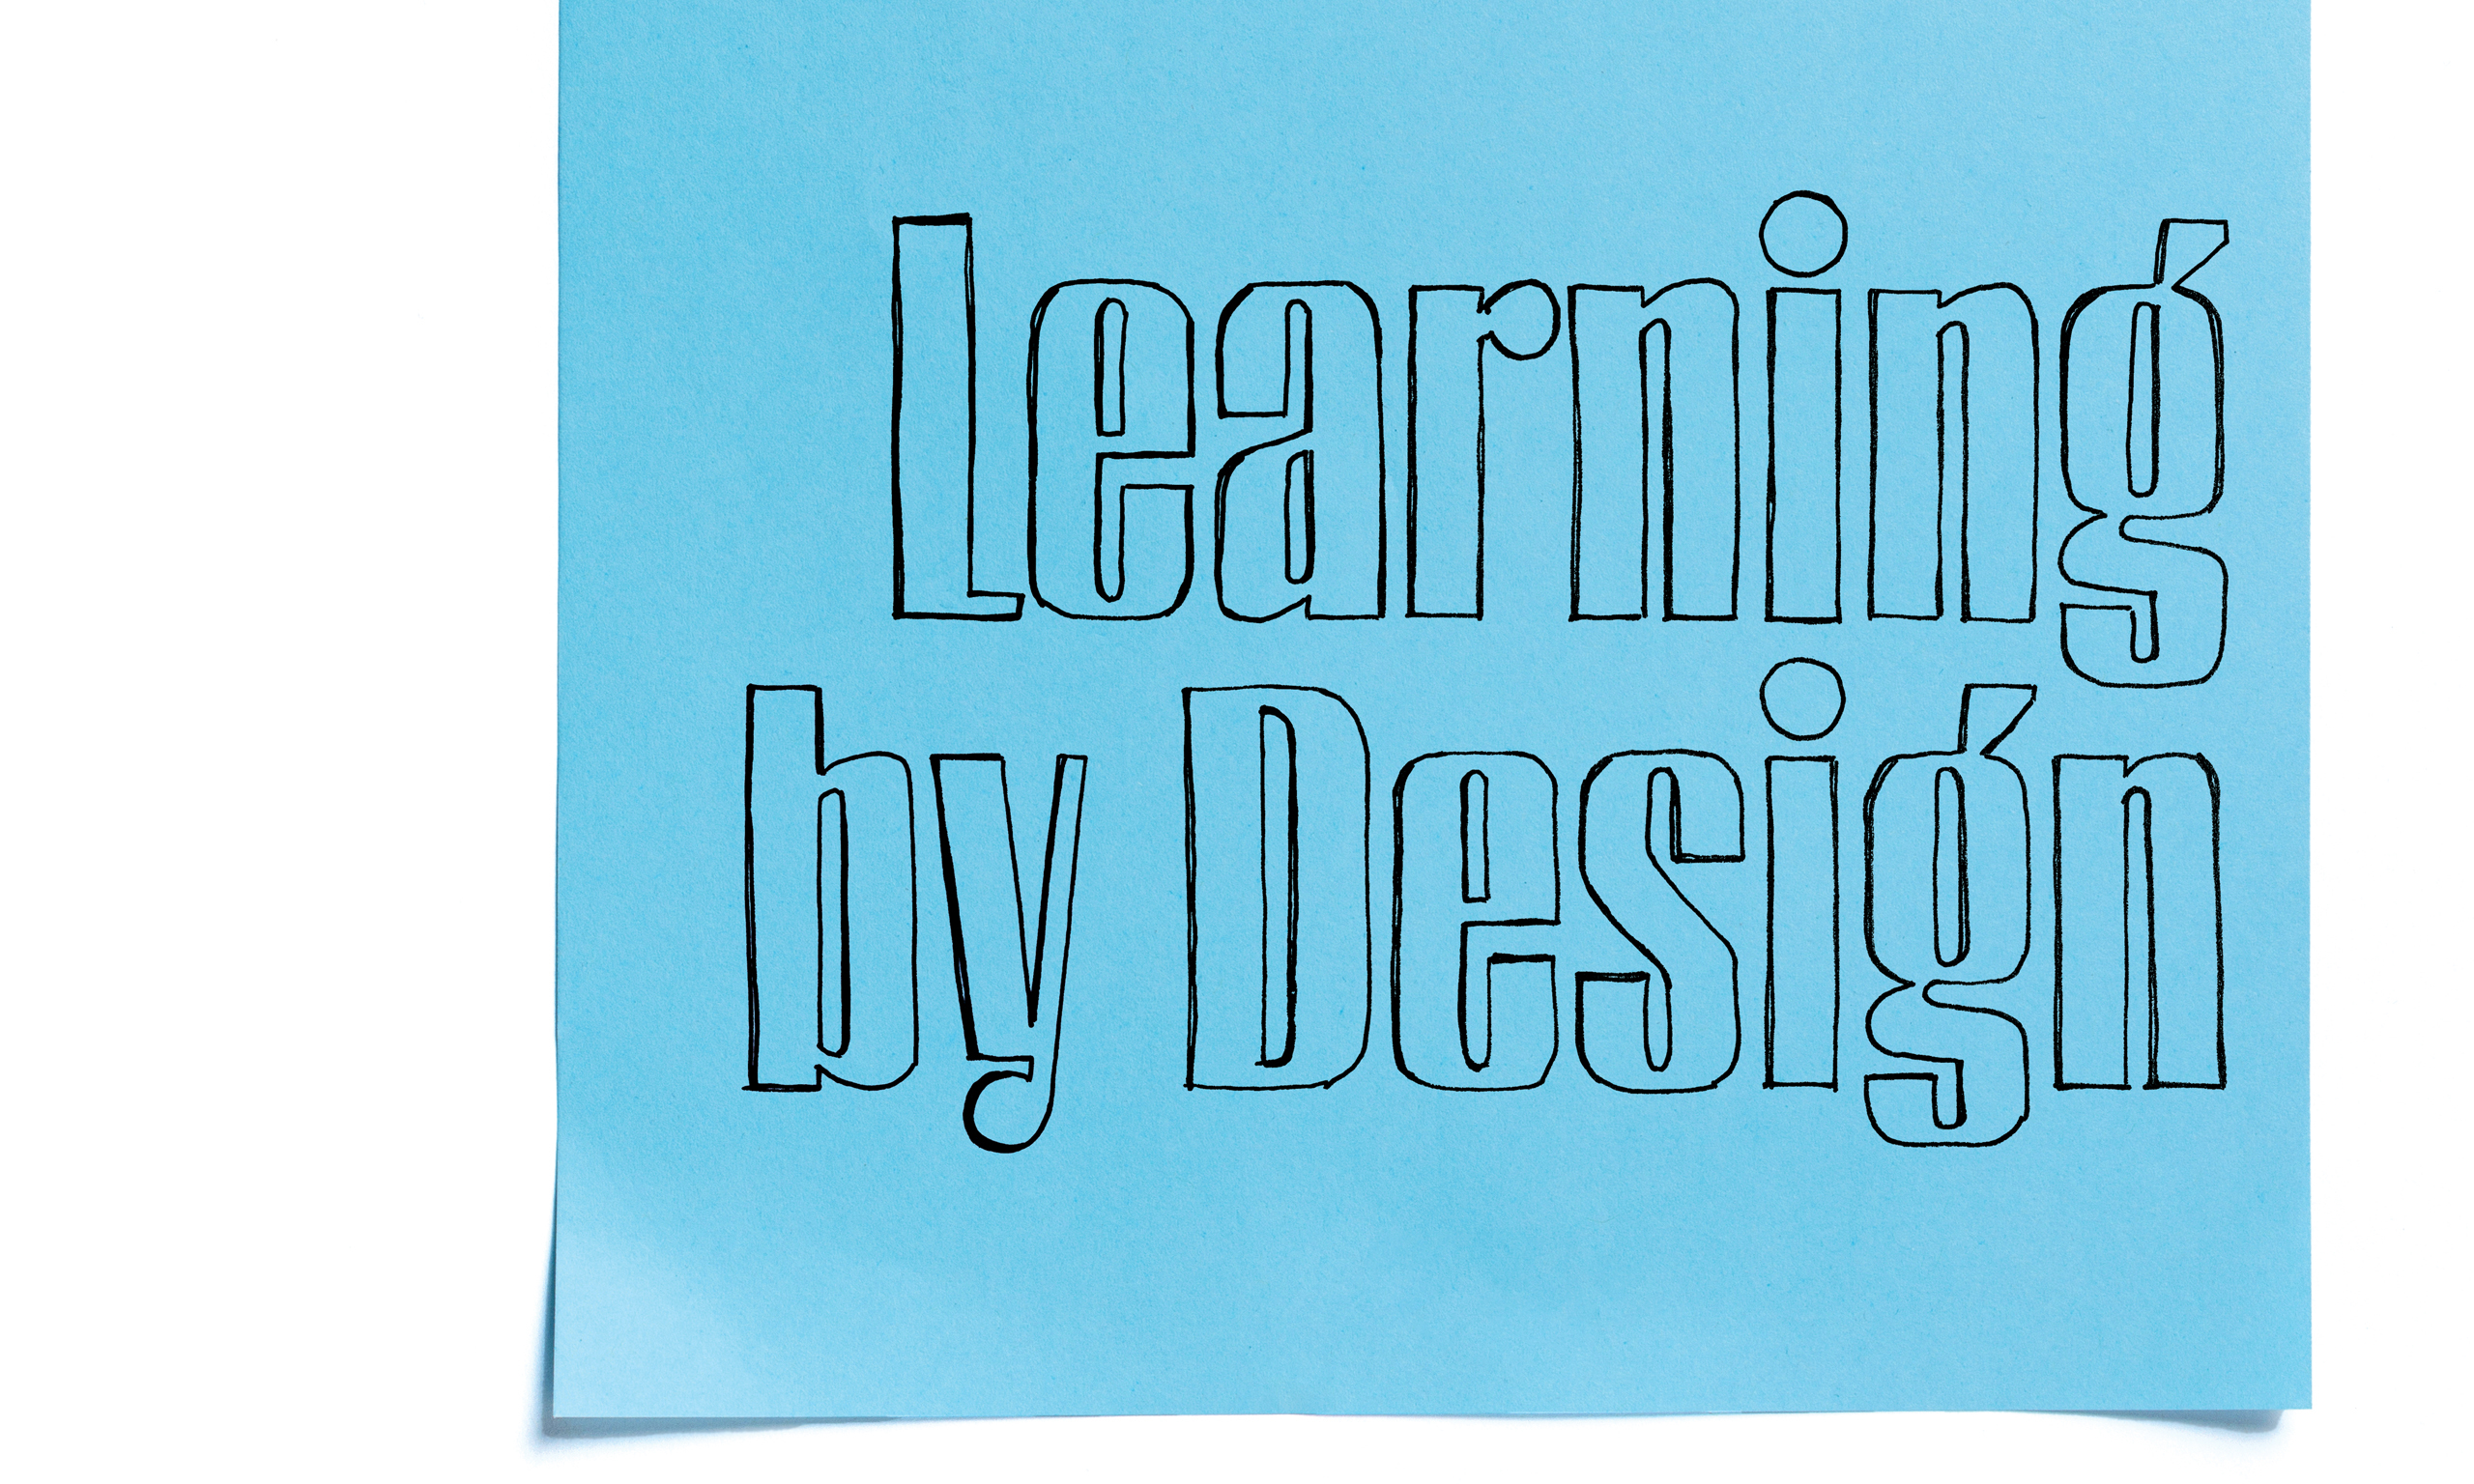 A blue sticky note that says "Learning by Design"